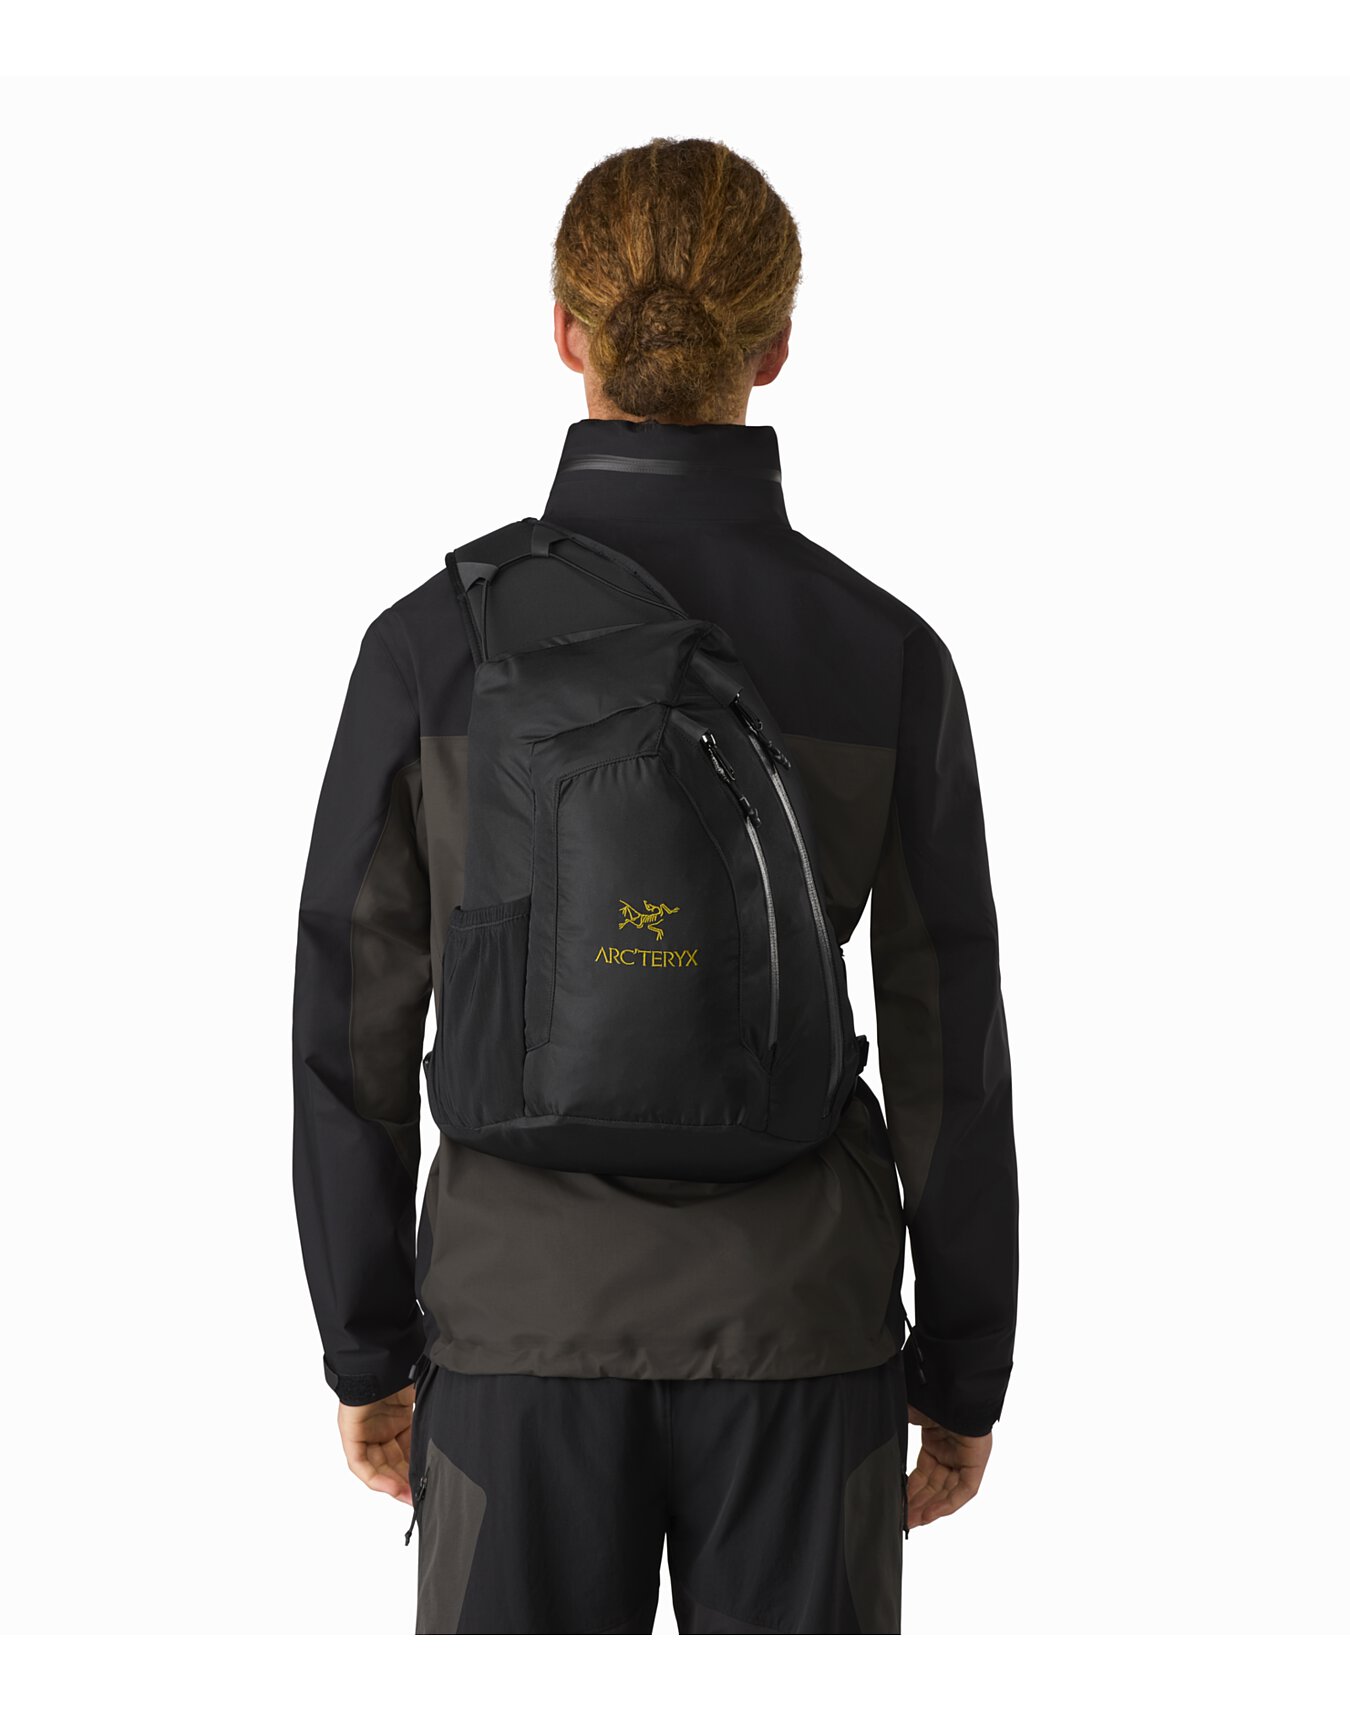 ARC’TERYX SYSTEM_A QUIVER ショルダーバッグ